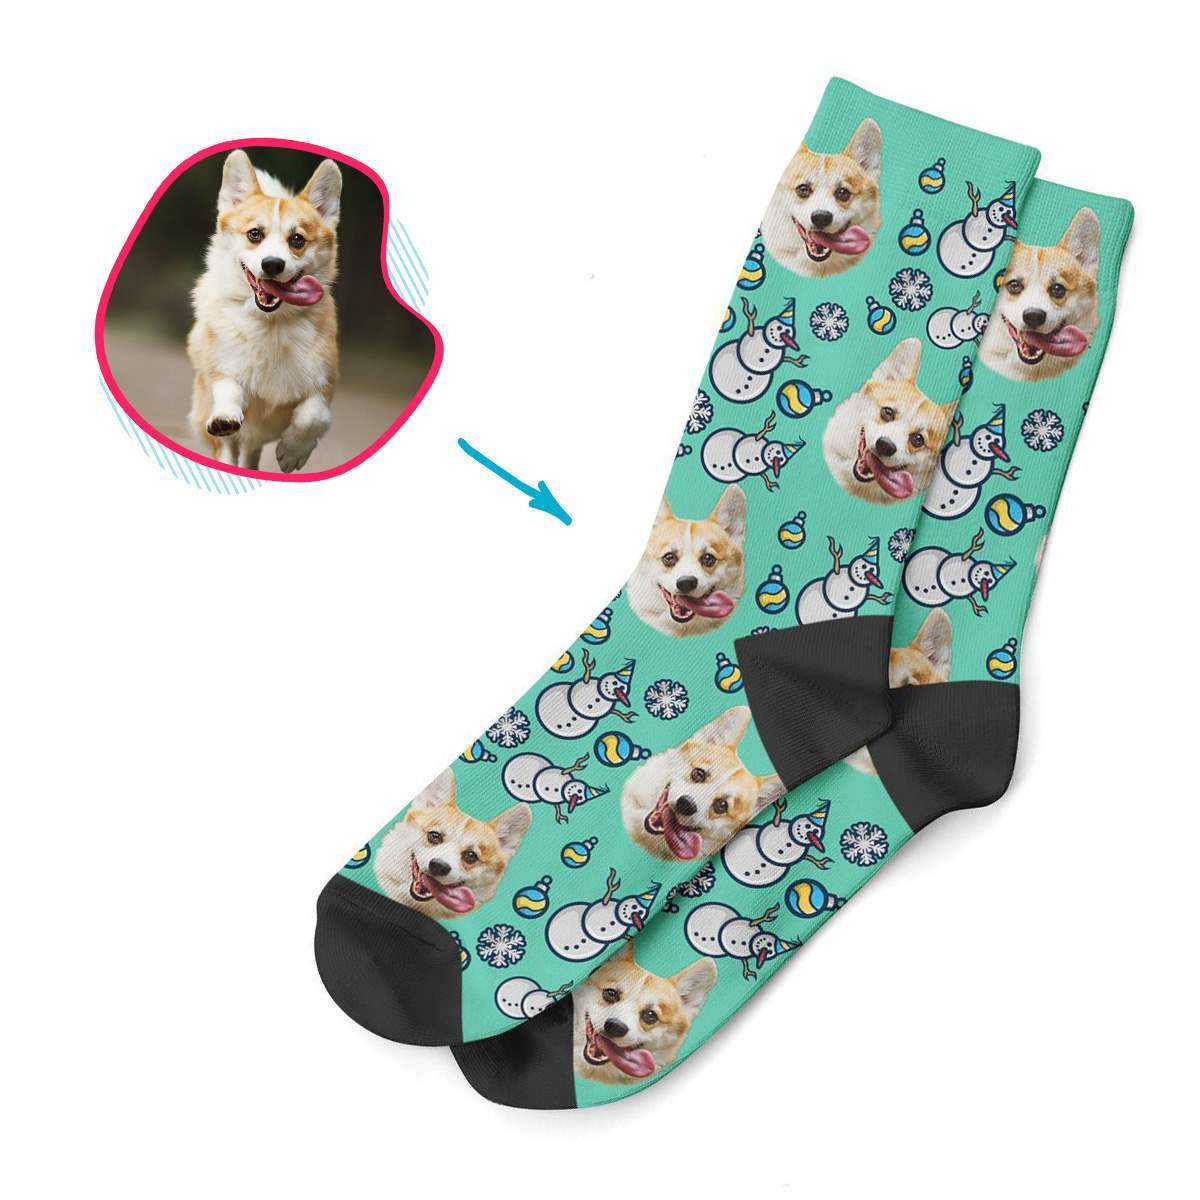 mint Snowman socks personalized with photo of face printed on them